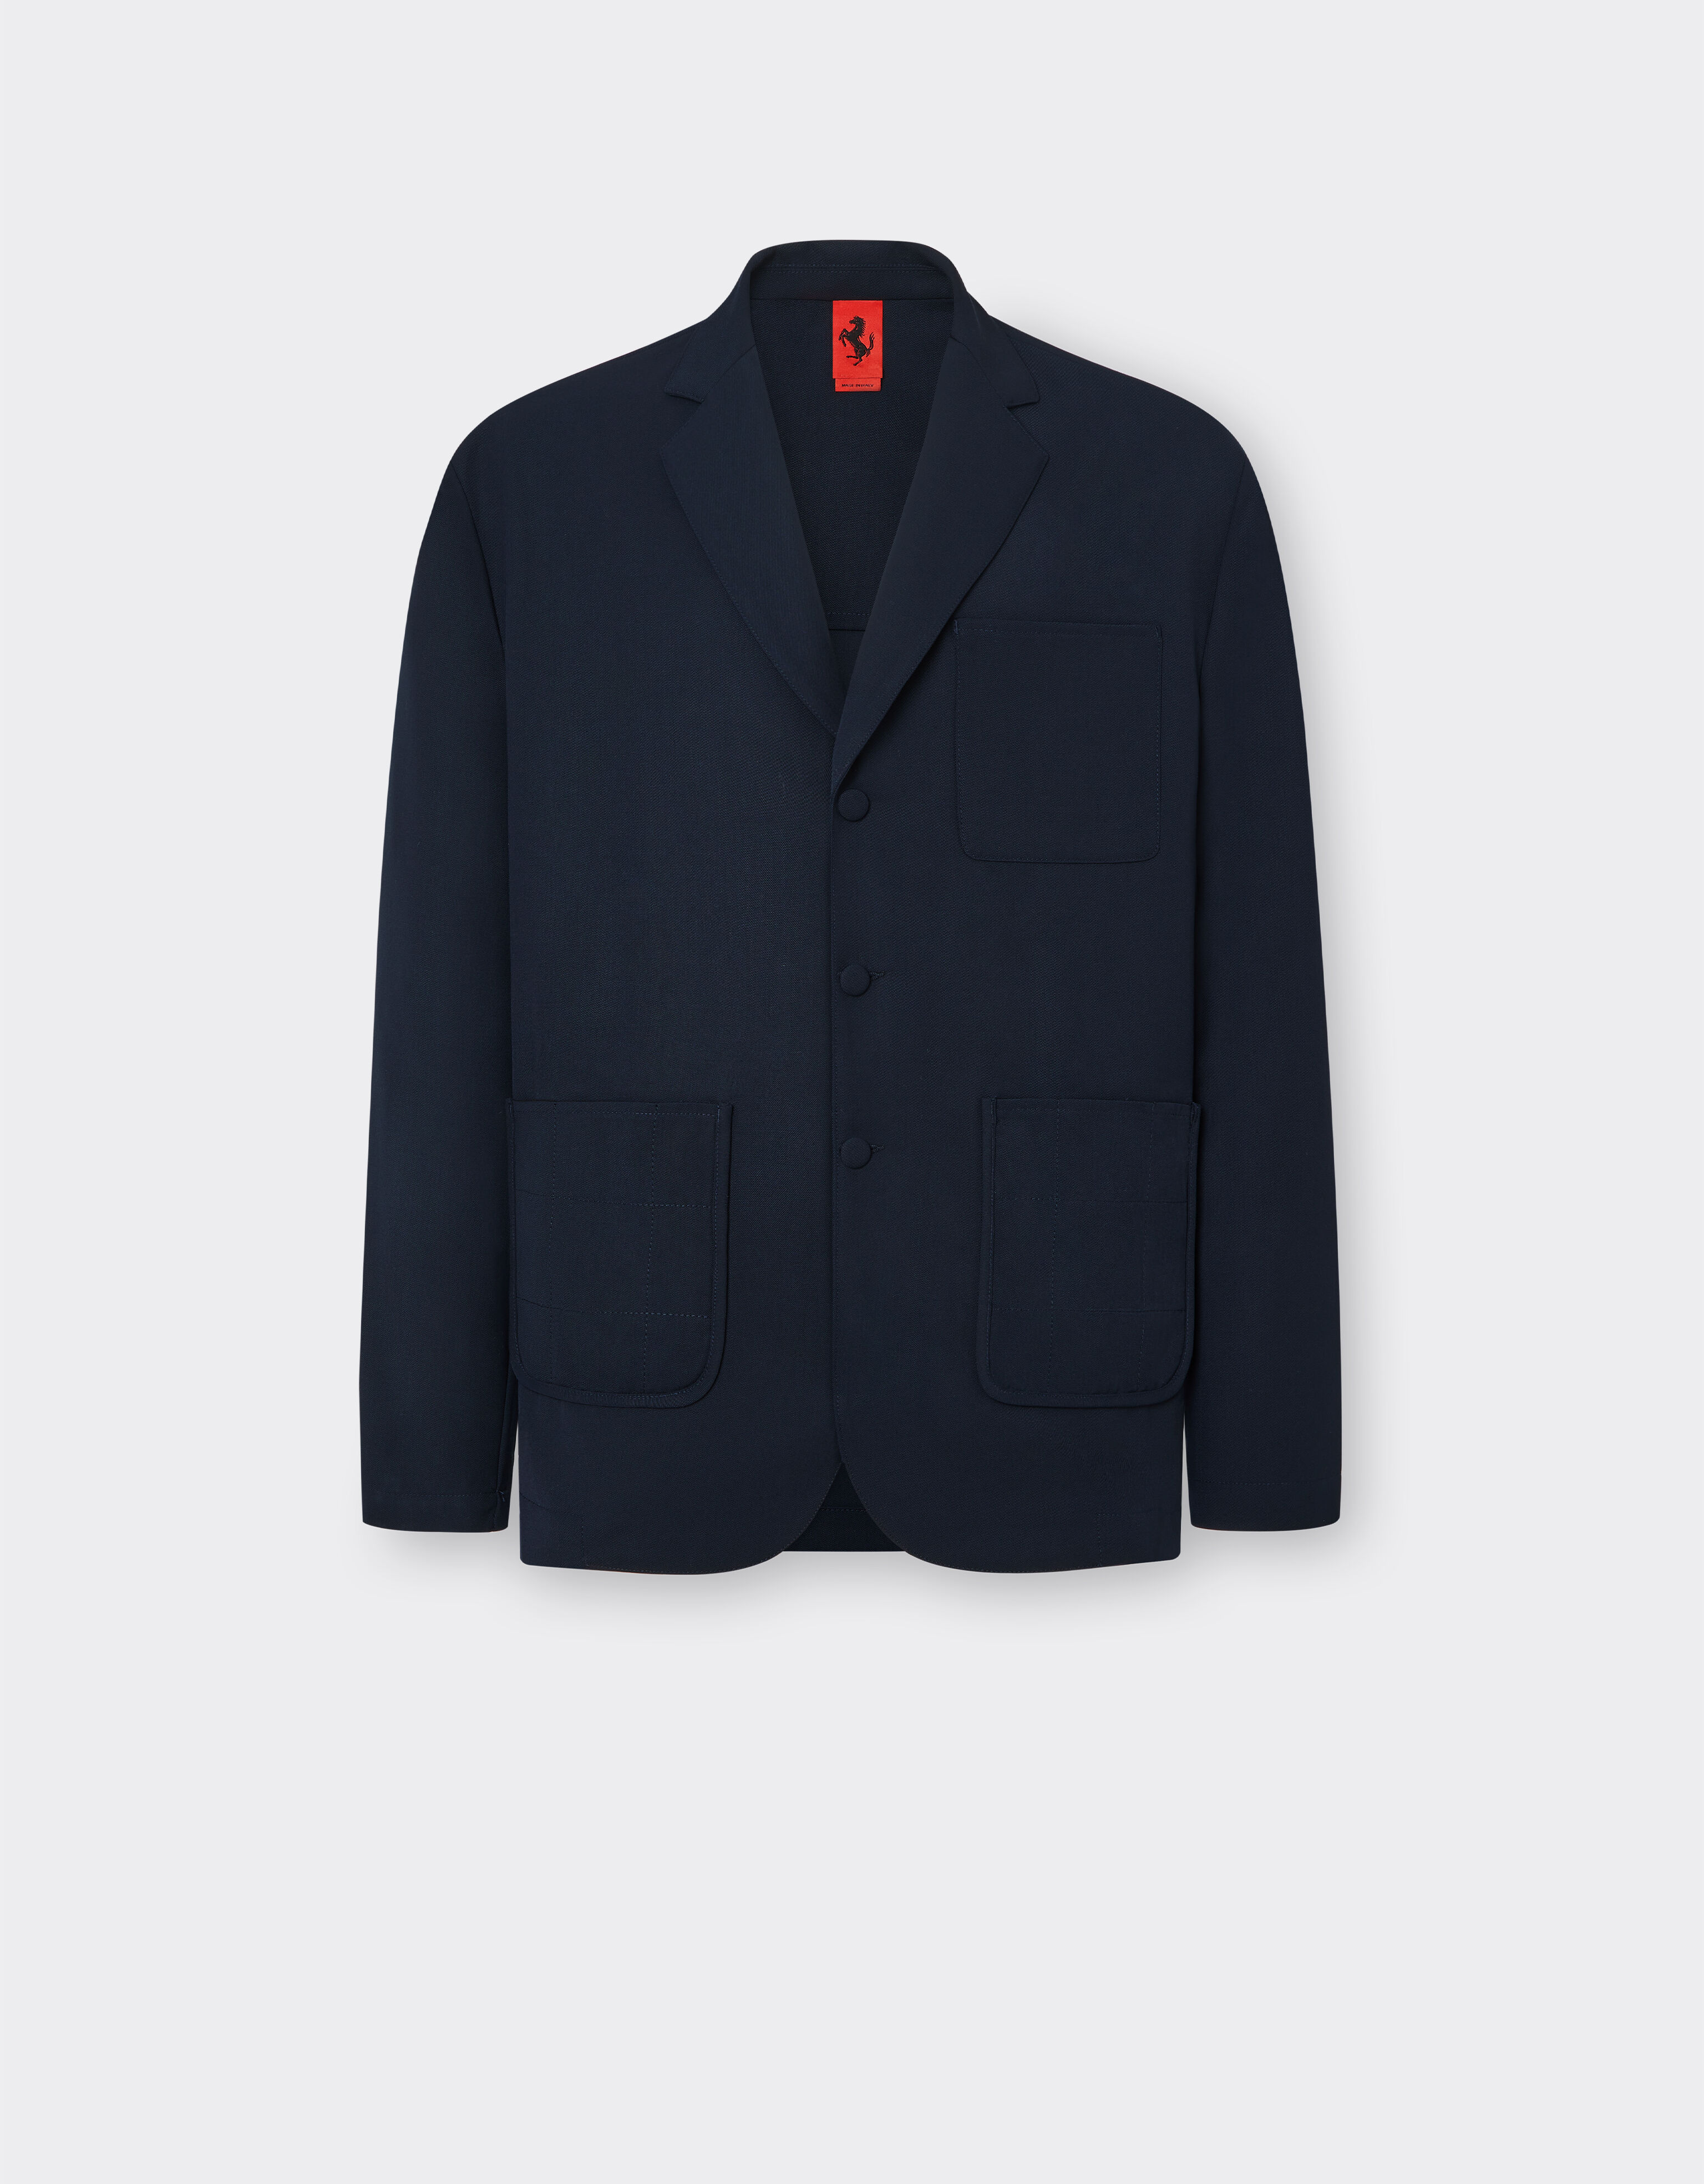 Ferrari Jacket in technical wool with 7X7 checked motif Navy 20768f